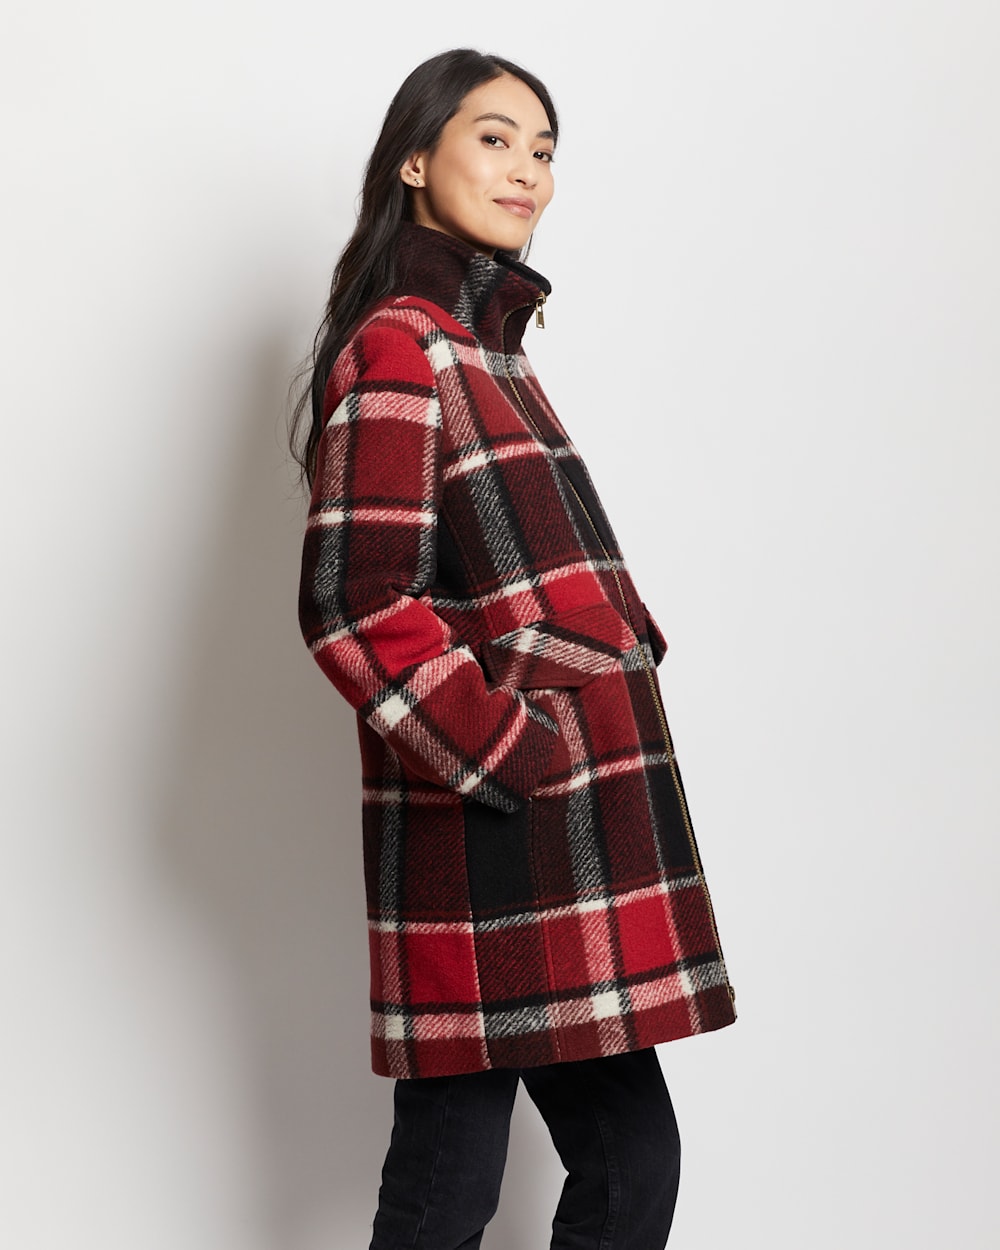 ALTERNATE VIEW OF WOMEN'S CAMDEN TOPPER COAT IN RED/BLACK EXPLODED PLAID image number 5